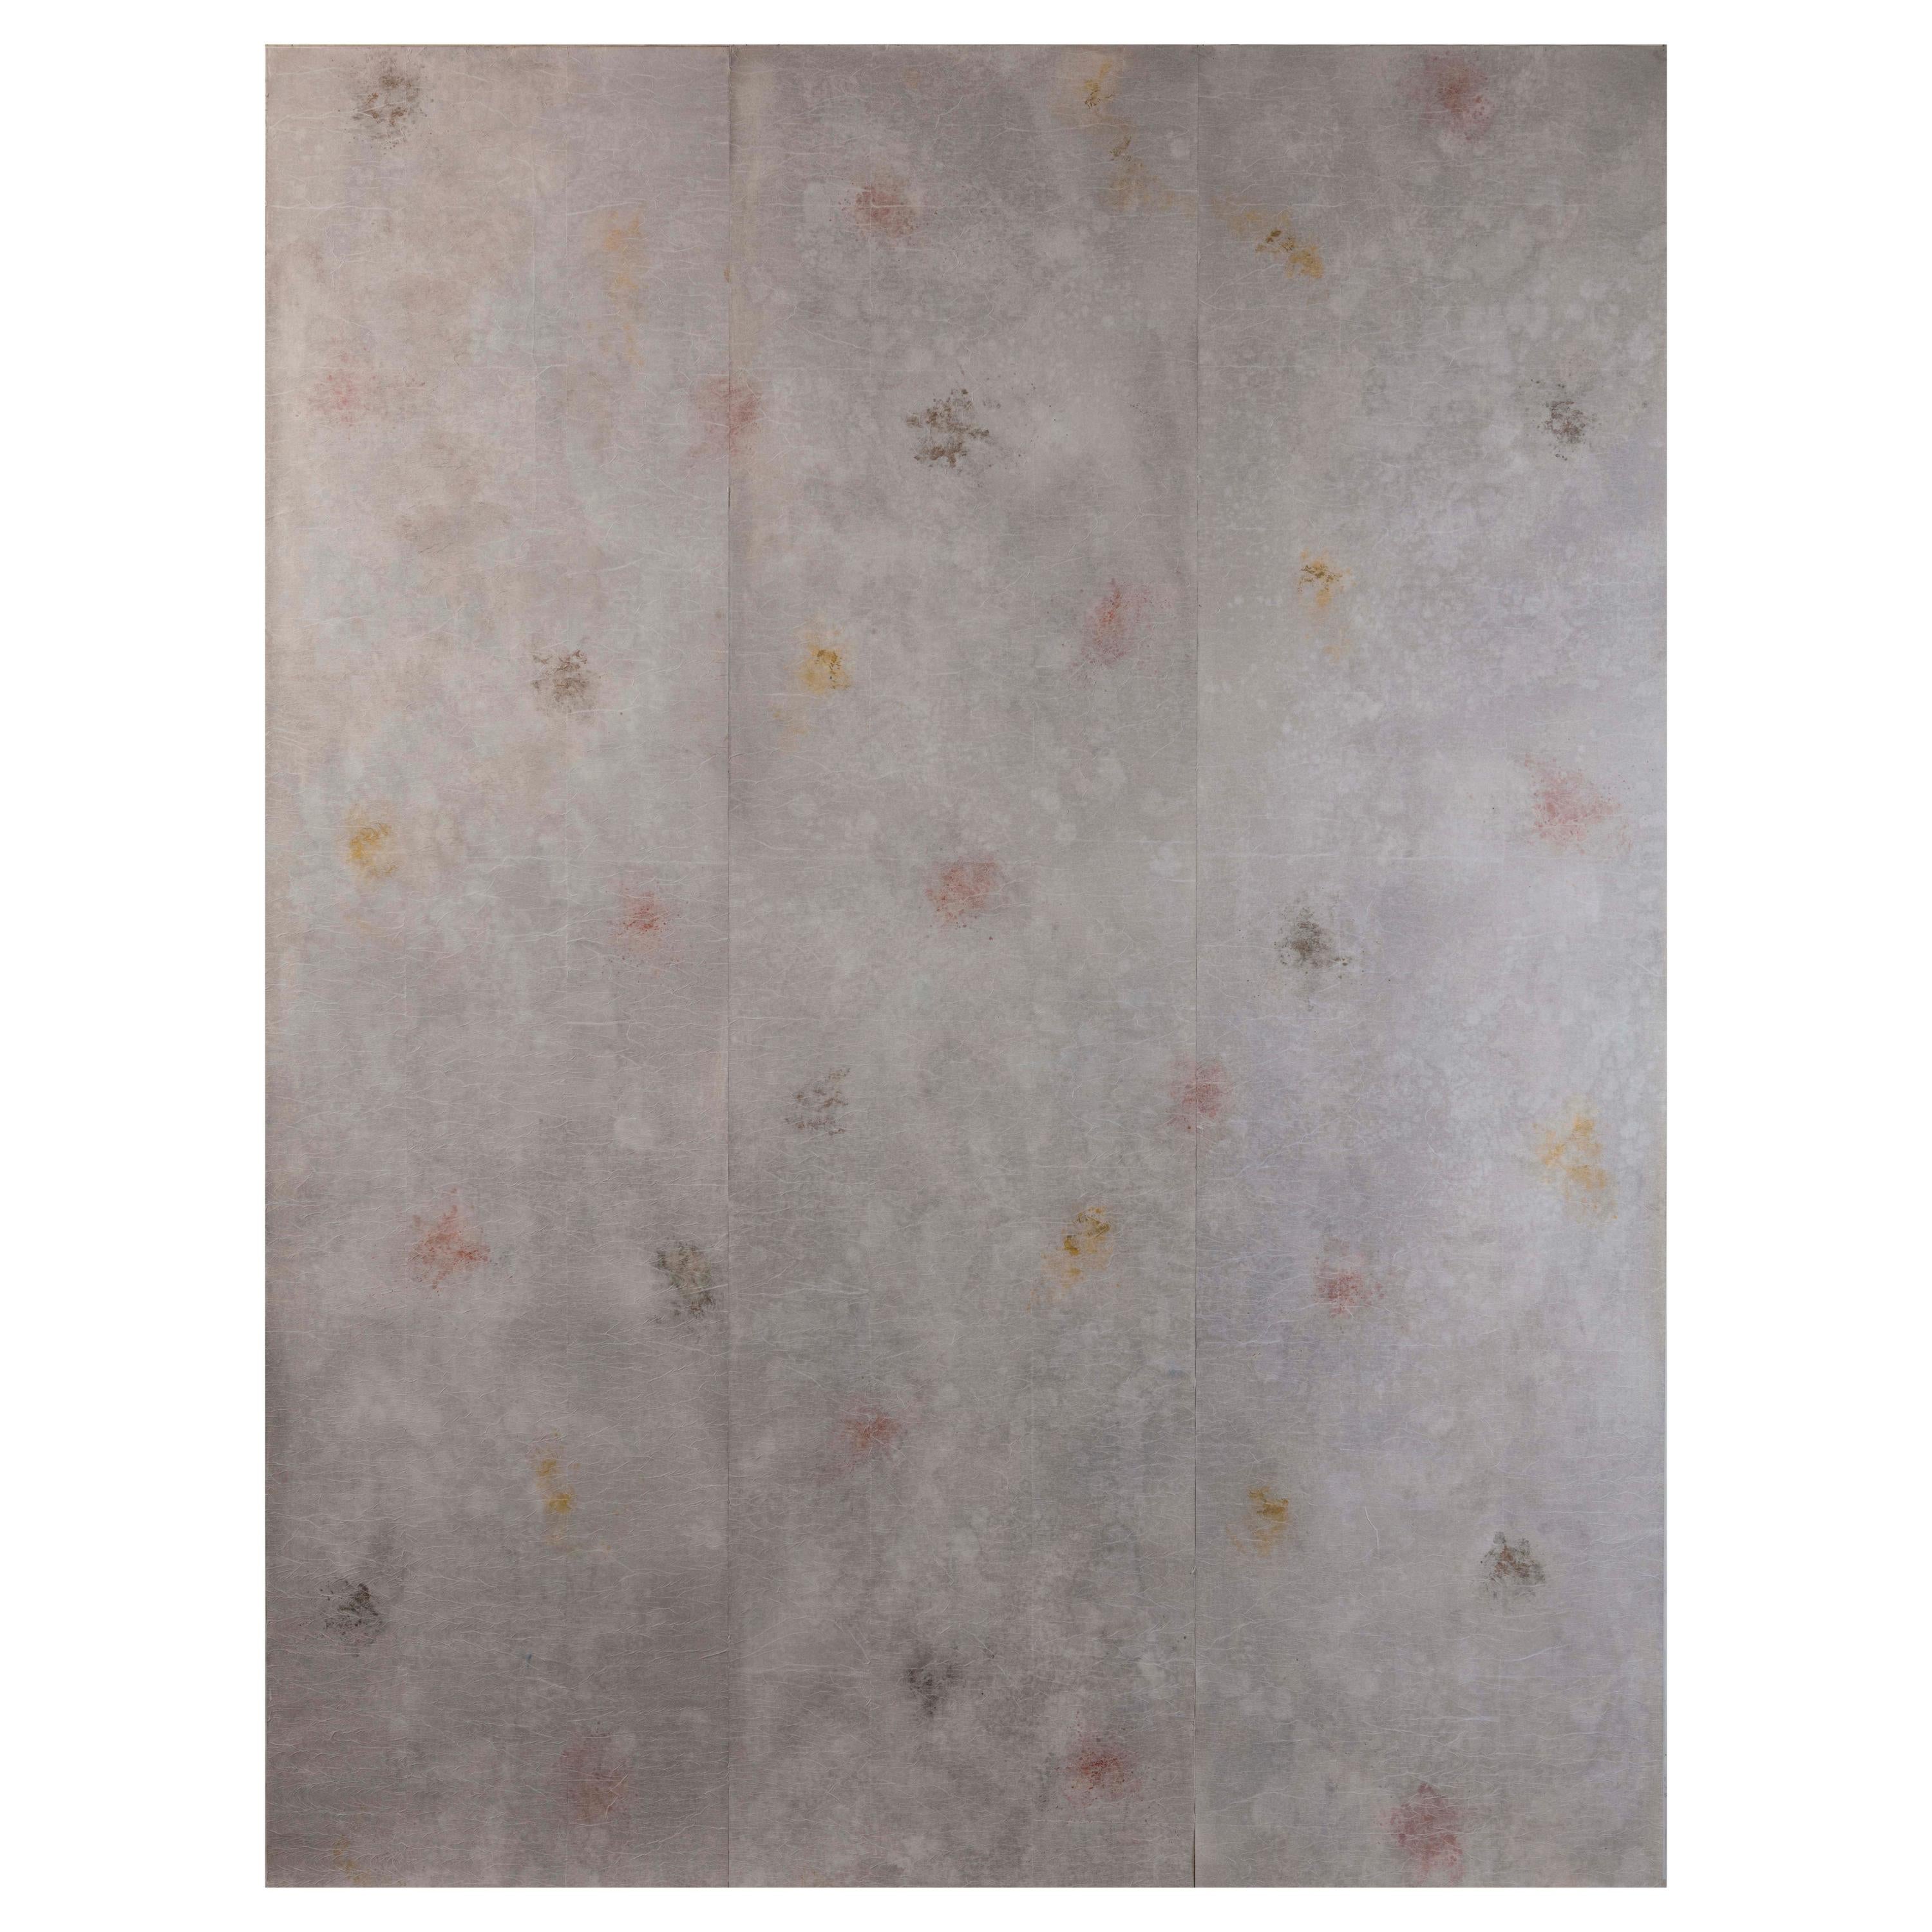 Grey, yellow pink handmade hand painted wallpaper wall decor Rose Scented Mirage